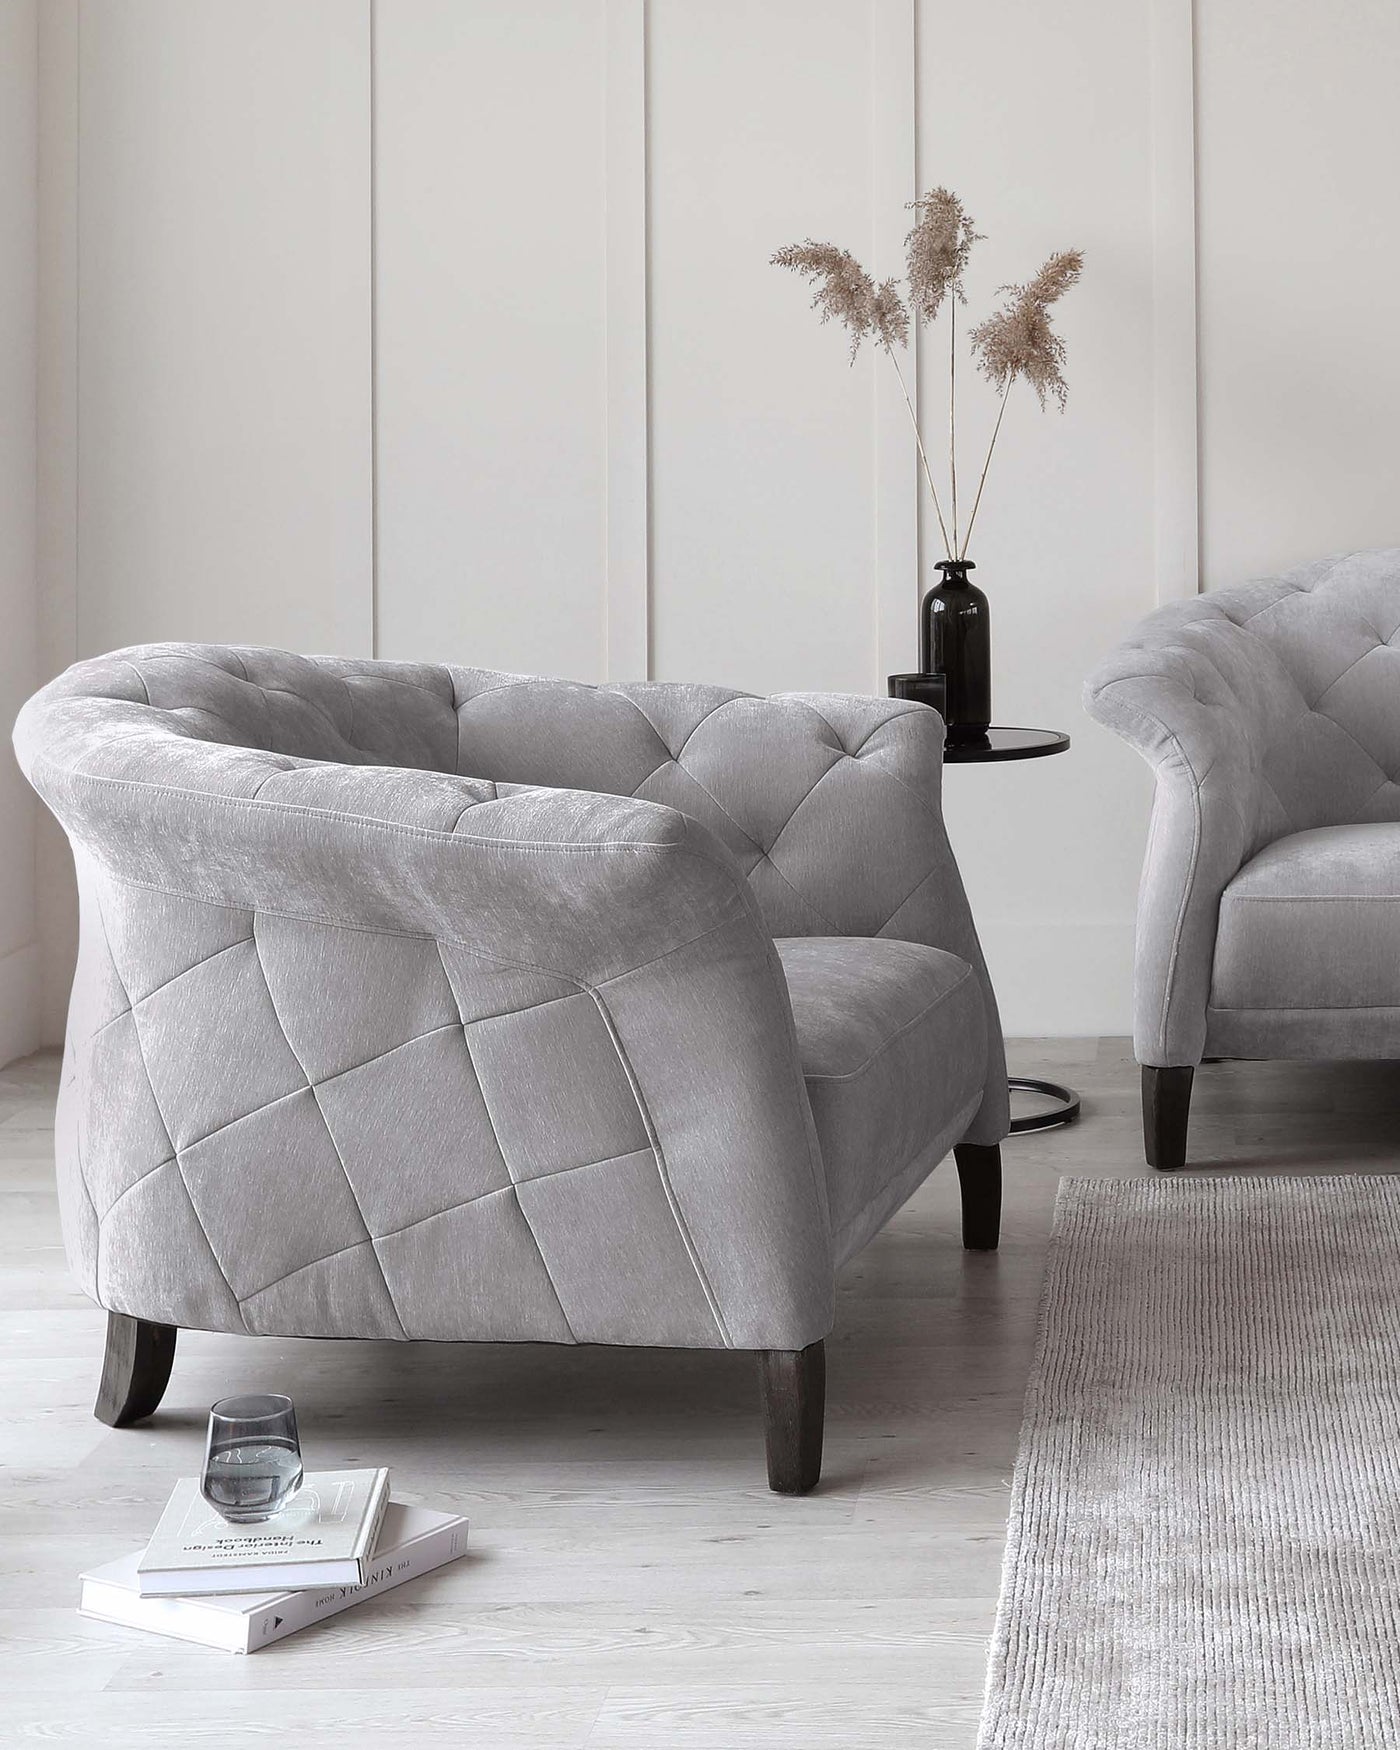 Elegant grey tufted armchairs with curved backrests and dark wooden legs, paired with a minimalistic black side table with a vase of pampas grass and positioned on a light grey textured rug.